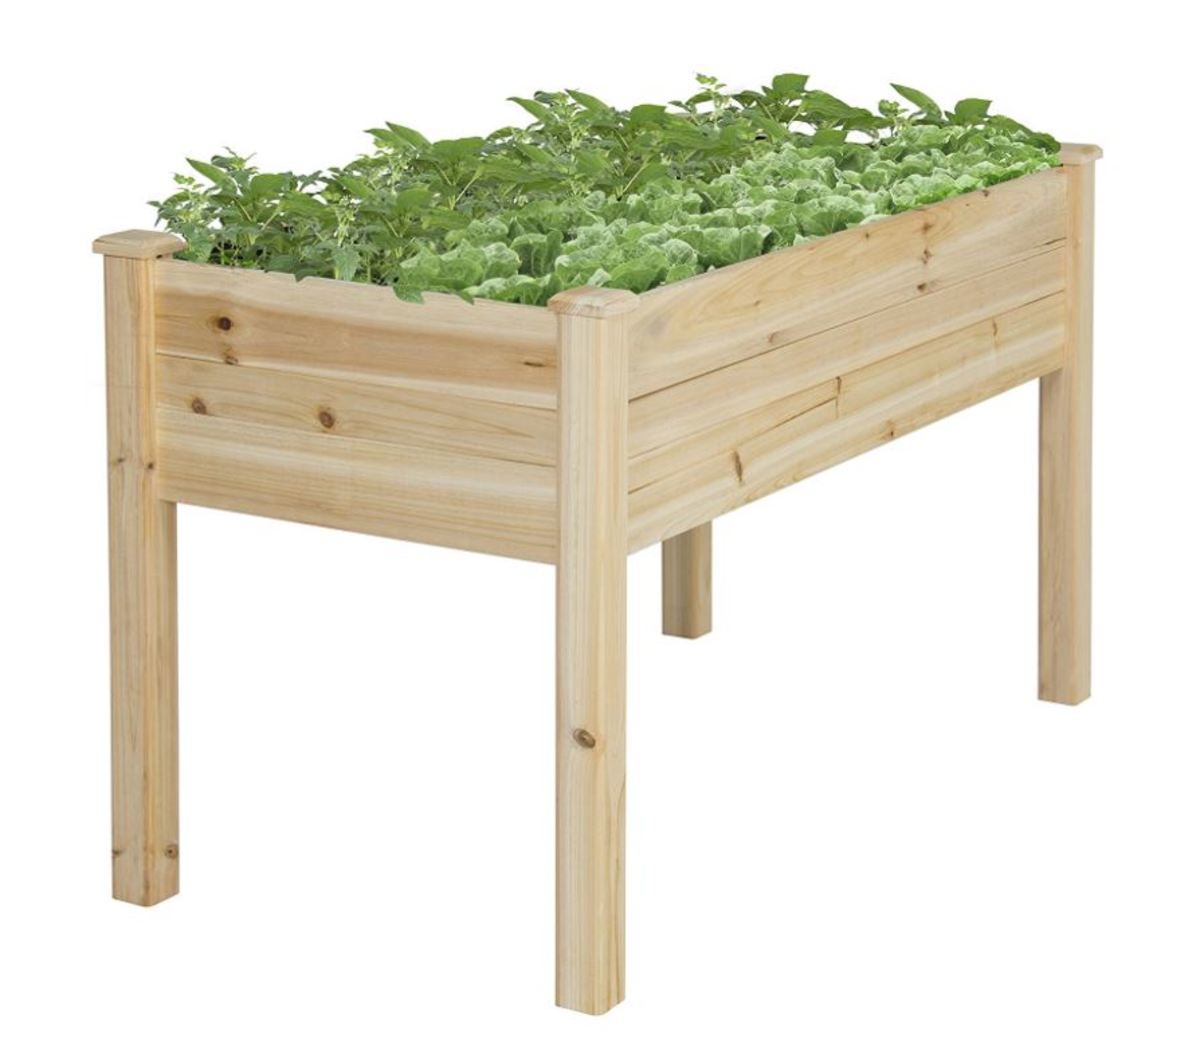 Elevated Garden Bed - The Easiest Way to Grow Vegetables